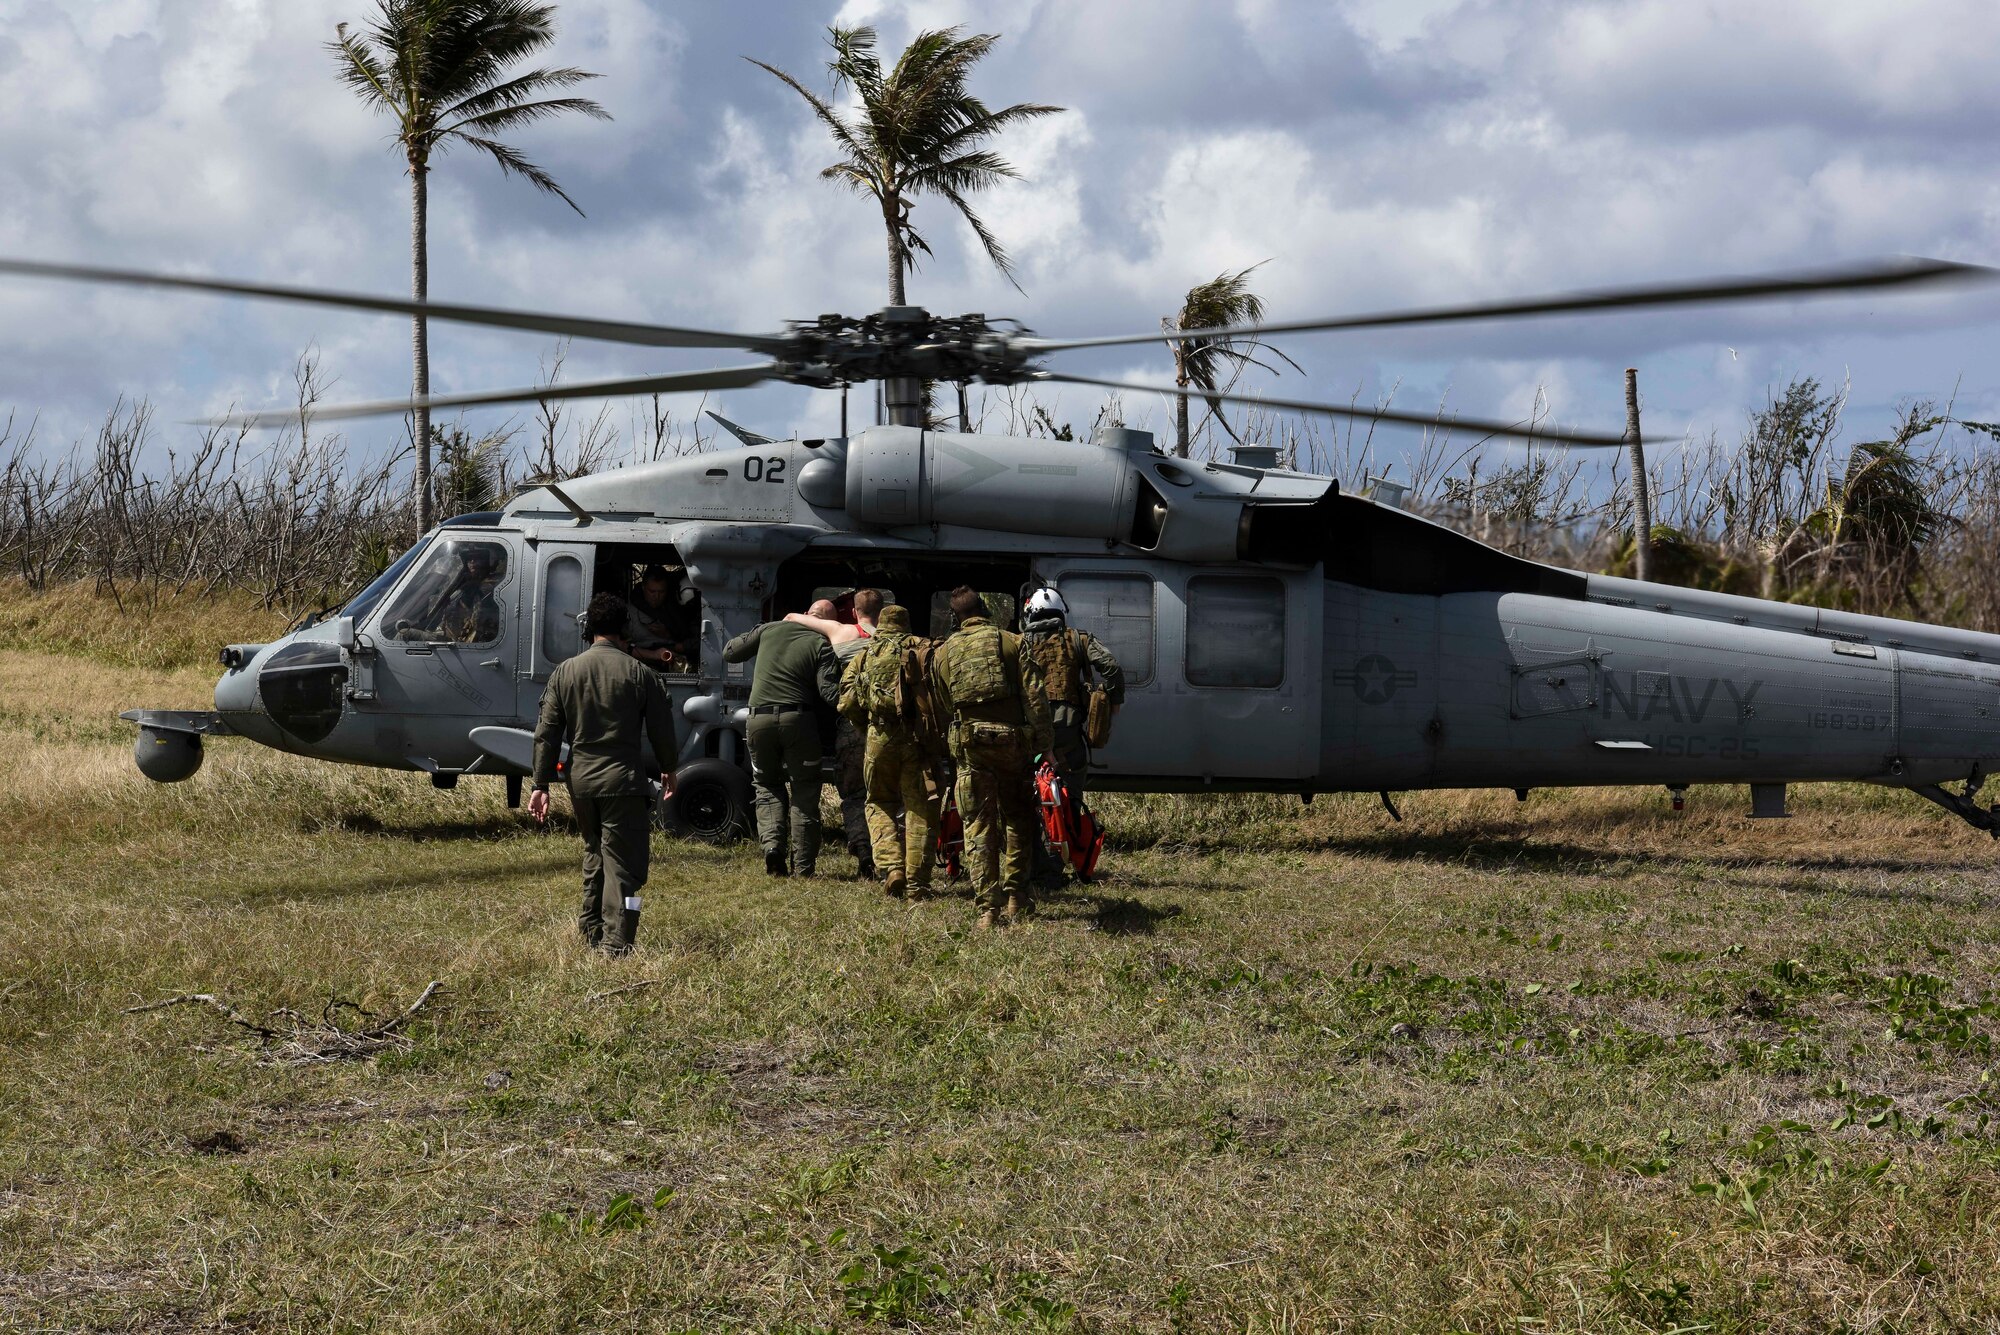 Service members from the United States, Royal Australian Air Force, and the Japan Air Self-Defense Force transfer simulated injured personnel to a MH-60 helicopter with the U.S. Navy's Helicopter Sea Combat Squadron 25 during an exercise for Cope North 2019, Feb. 27, 2019, at Tinian, Commonwealth of the Northern Marianas. Service members from the U.S., Royal Australian Air Force, and the Japan Air Self-Defense Force exercised their Humanitarian Assistance and Disaster Relief skills together on Tinian by providing emergency medical care and secure transportation for simulated patients.  (U.S. Air Force photo by Tech. Sgt. Jake Barreiro)